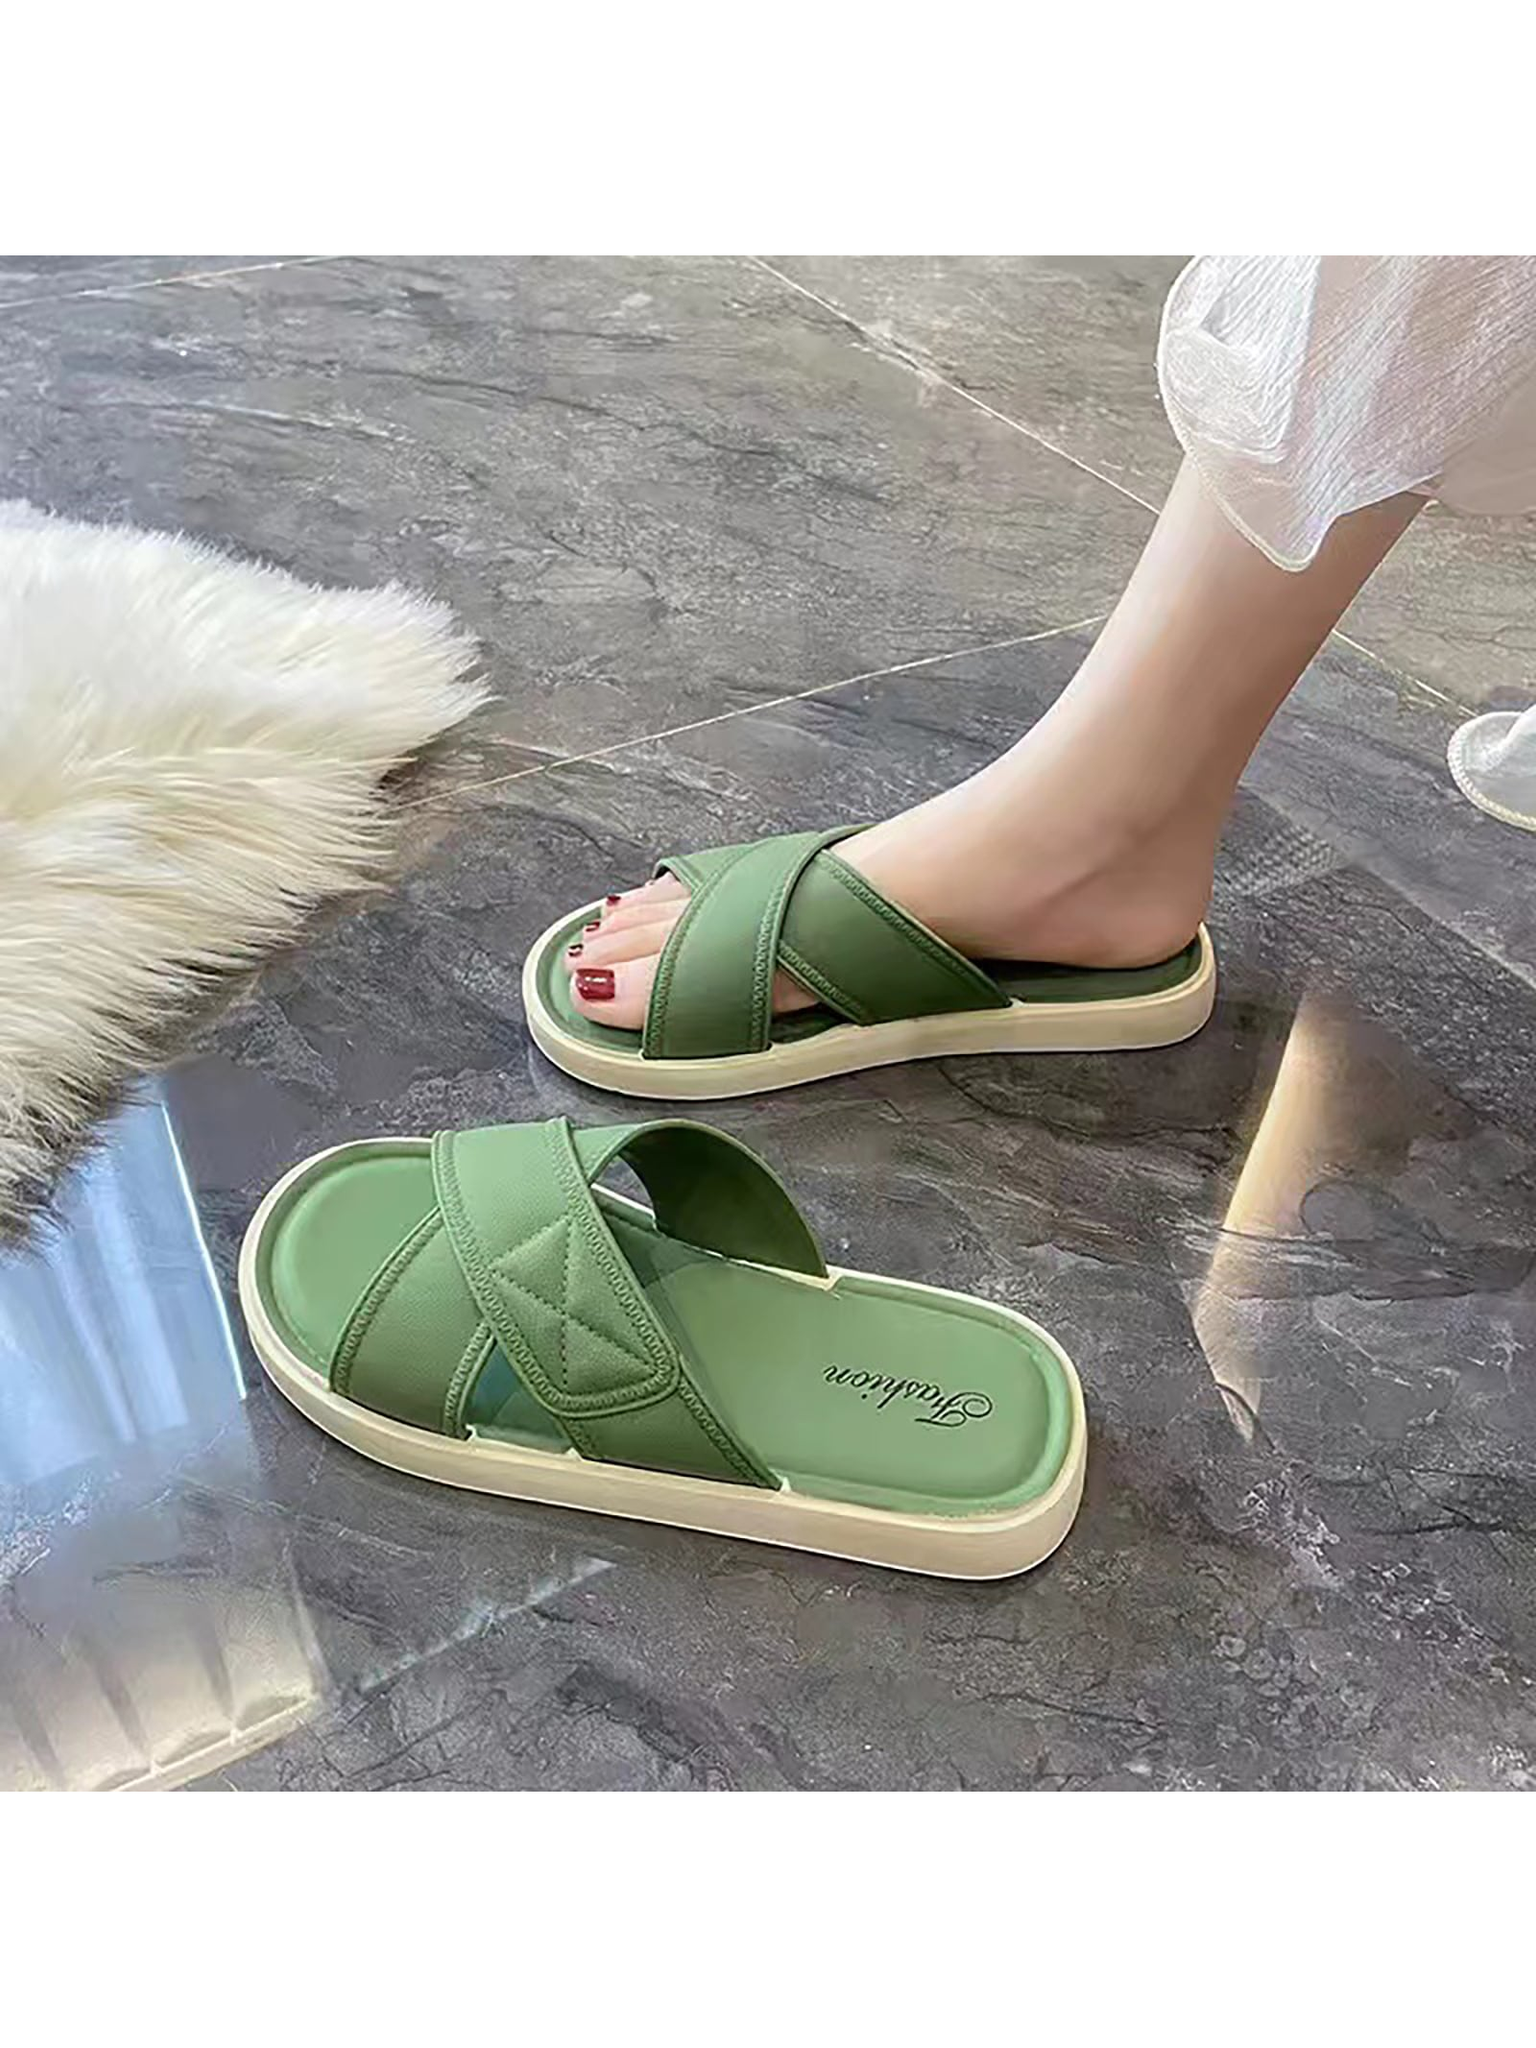 New Arrival Simple, Elegant And Versatile Slippers With Soft Pvc Outsole For Anti-Slip On The Beach And In Home Bathroom - Suitable For Indoor And Outdoor Wear, Giving You A Chic And Fresh Ins Look-Green-4